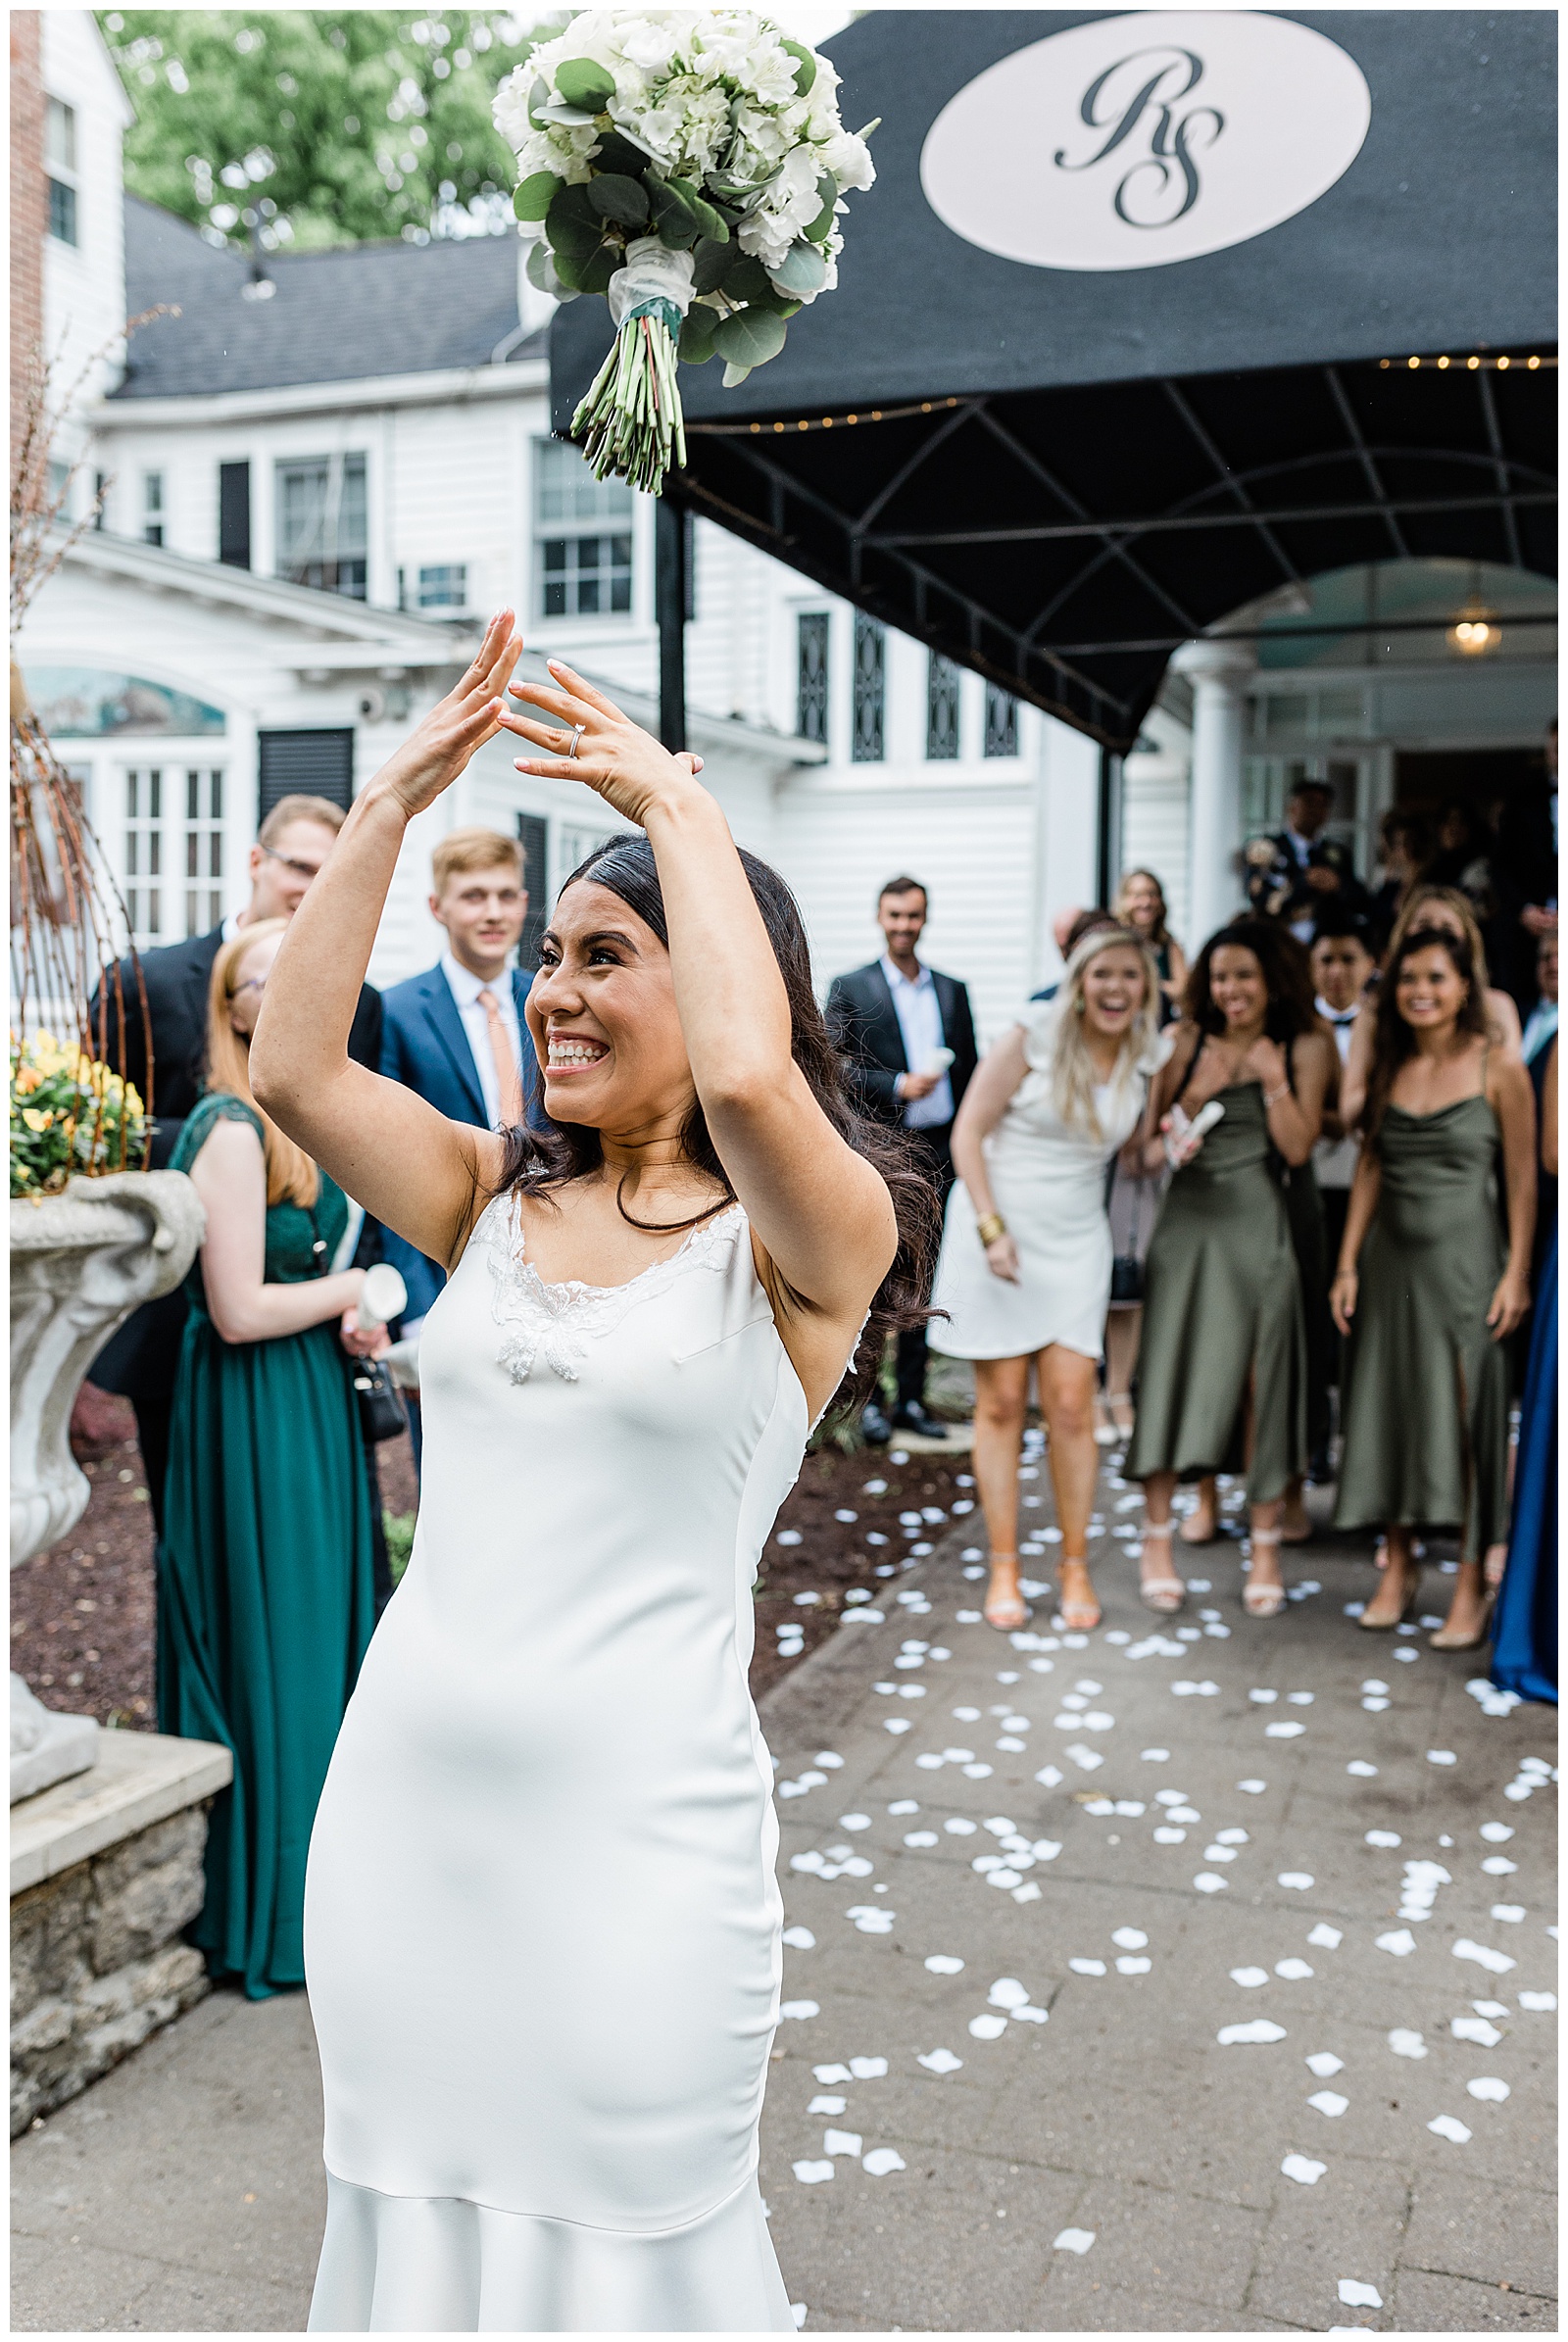 bride-throwing-wedding-bouquet-exit-kristina-staal-photography.jpg